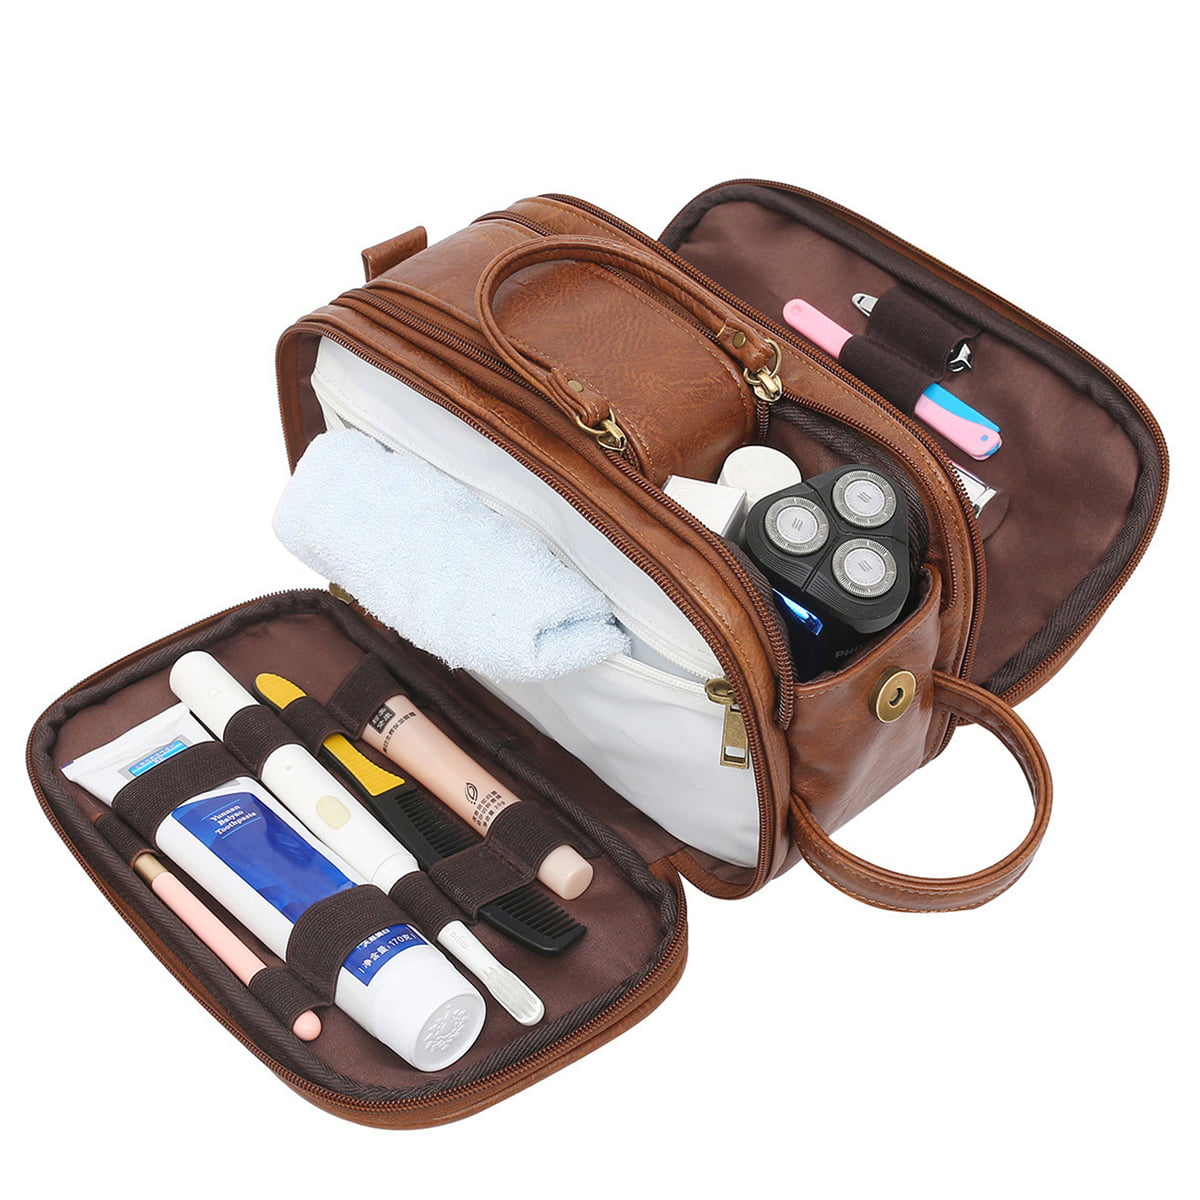 PU leather travel wash gargle bag to receive wholesale high level